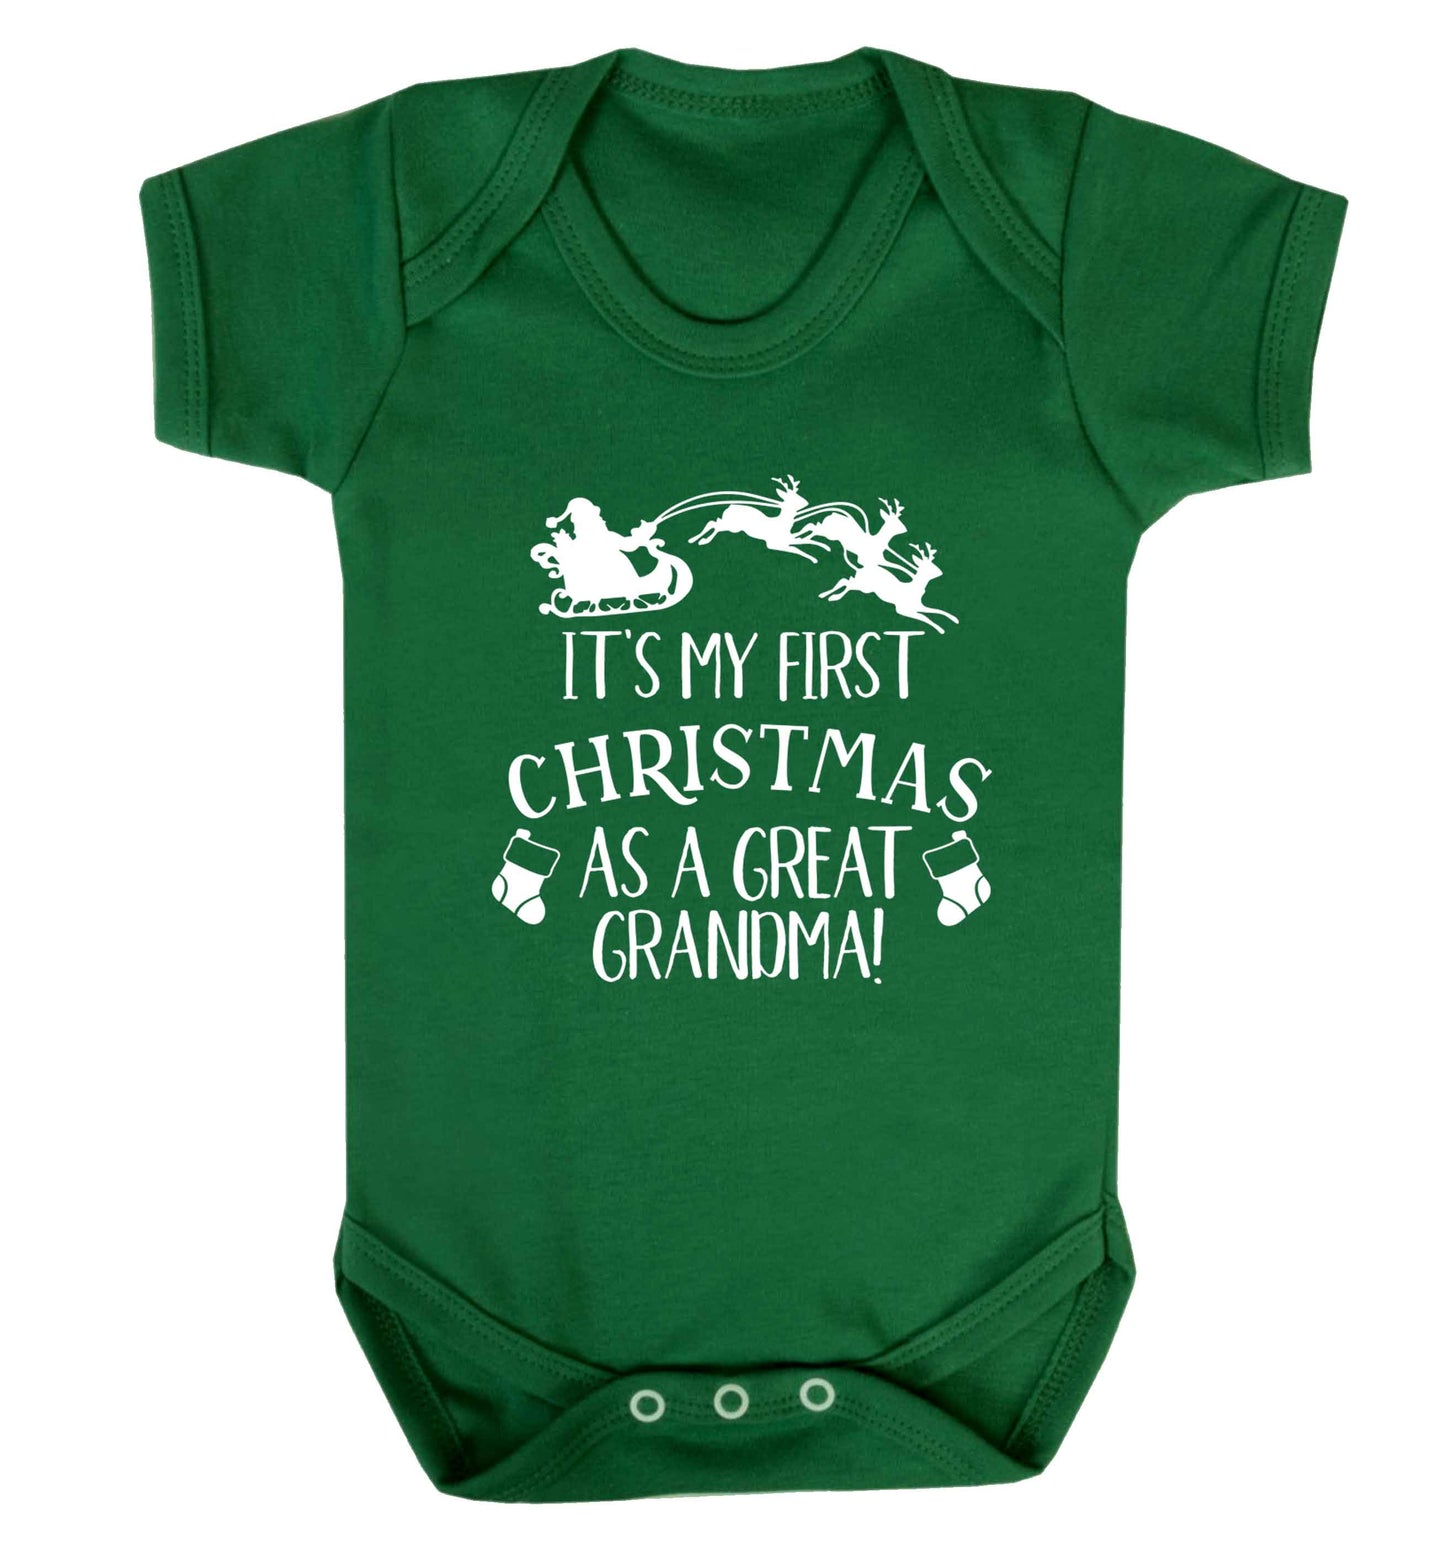 It's my first Christmas as a great grandma! Baby Vest green 18-24 months